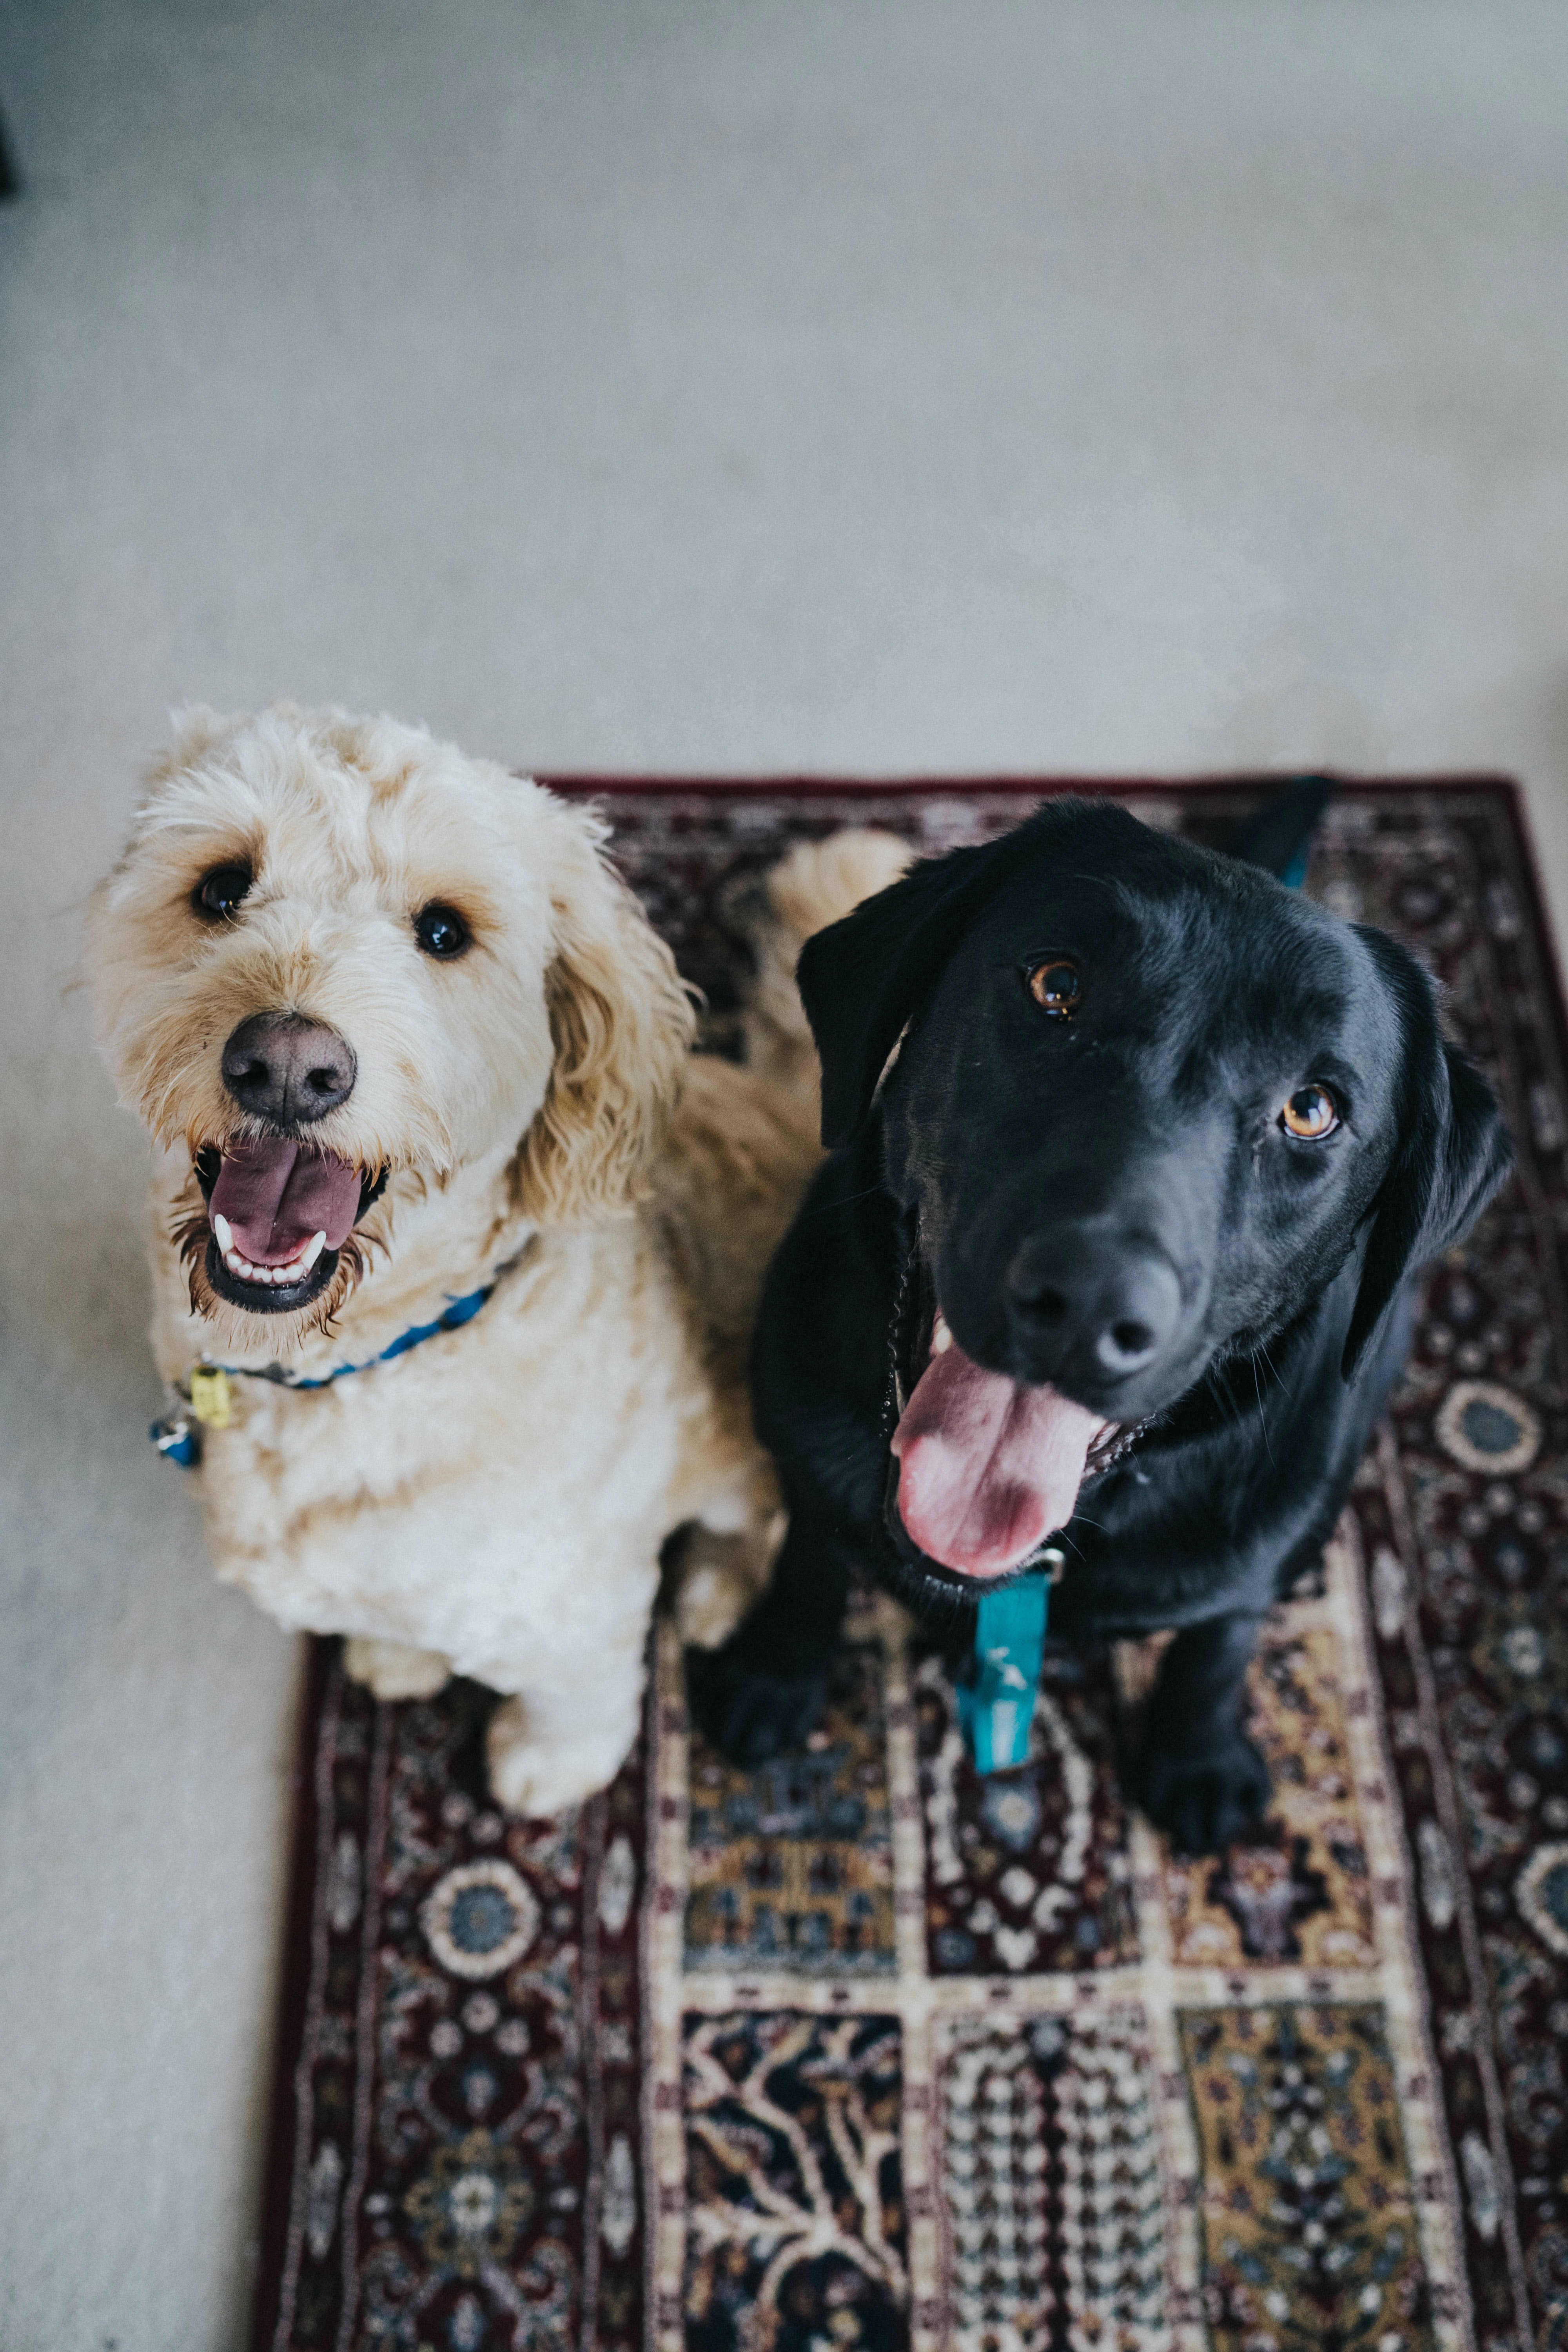 A white dog and a black dog looking up at the camera standing on a rug.